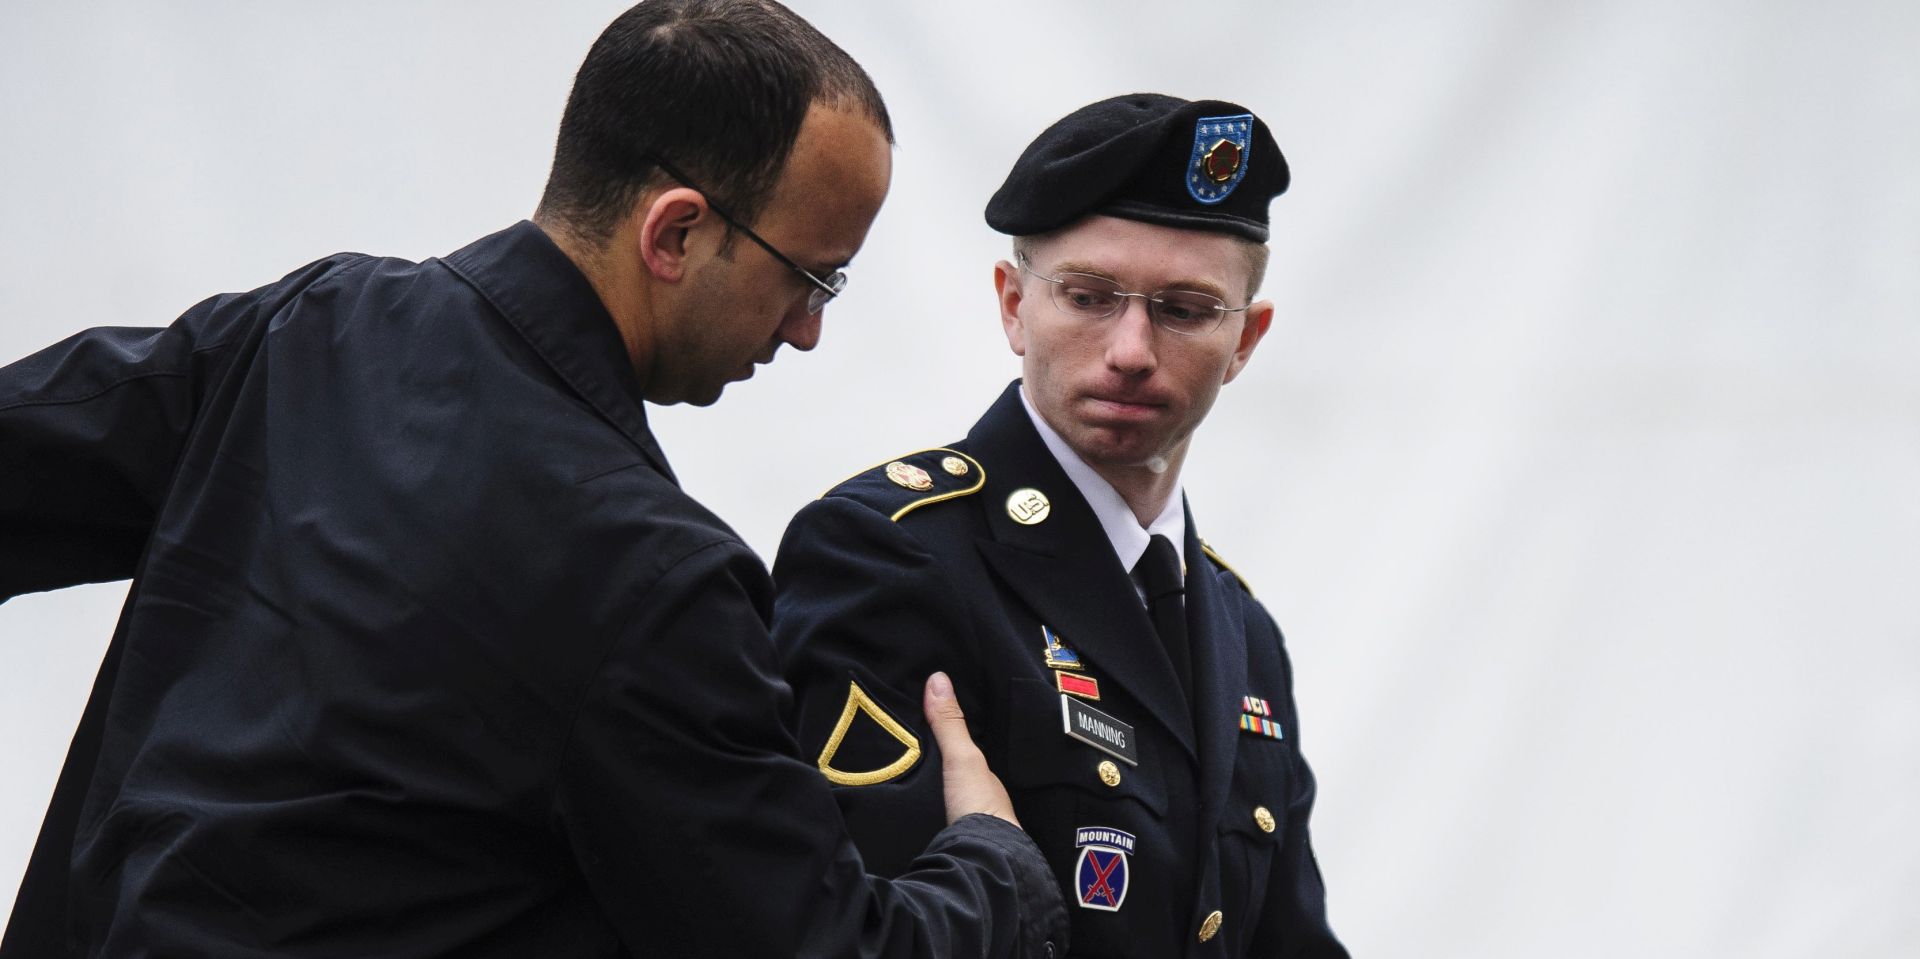 epa05725636 (FILE) - A file picture dated 10 June 2013 shows US Army Private Bradley Manning (R), who later changed his name to Chelsea Manning, arrives at the courtroom for the fourth day of his court-martial at Fort Meade, Maryland, USA. US President Obama on 17 January 2017 commuted convicted whistleblower Chelsea Manning's remaining sentence to have her be freed on 17 May 2017.  EPA/PETE MAROVICH